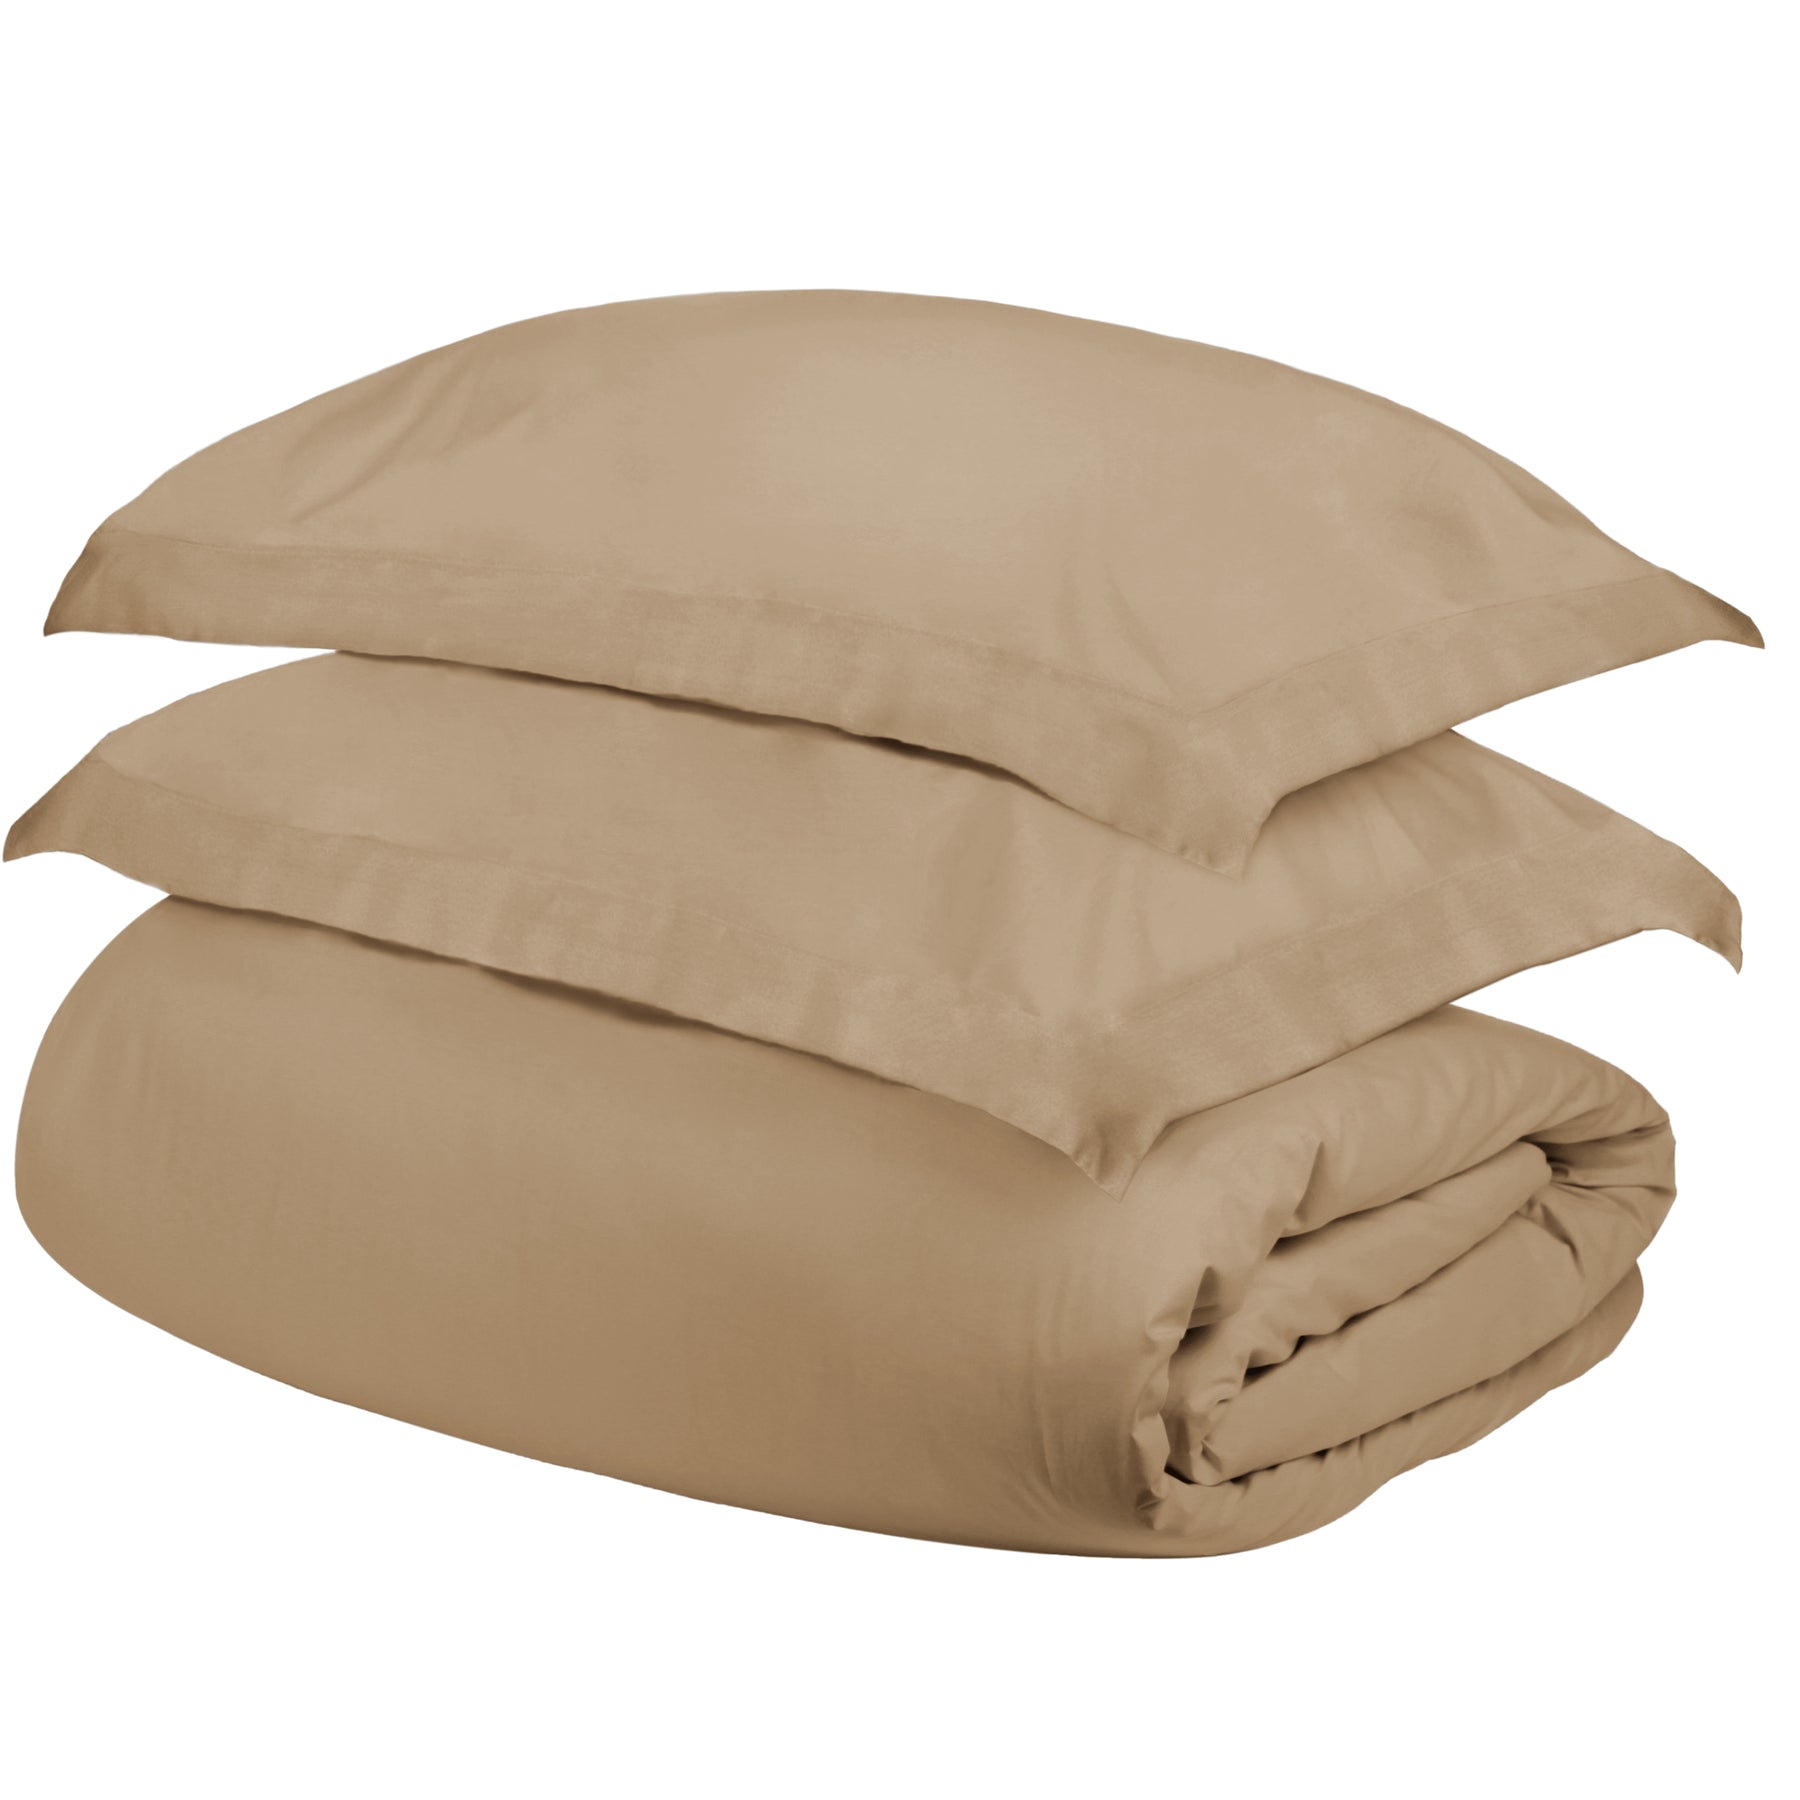 Superior Egyptian Cotton 300 Thread Count Solid Duvet Cover Set - Tan